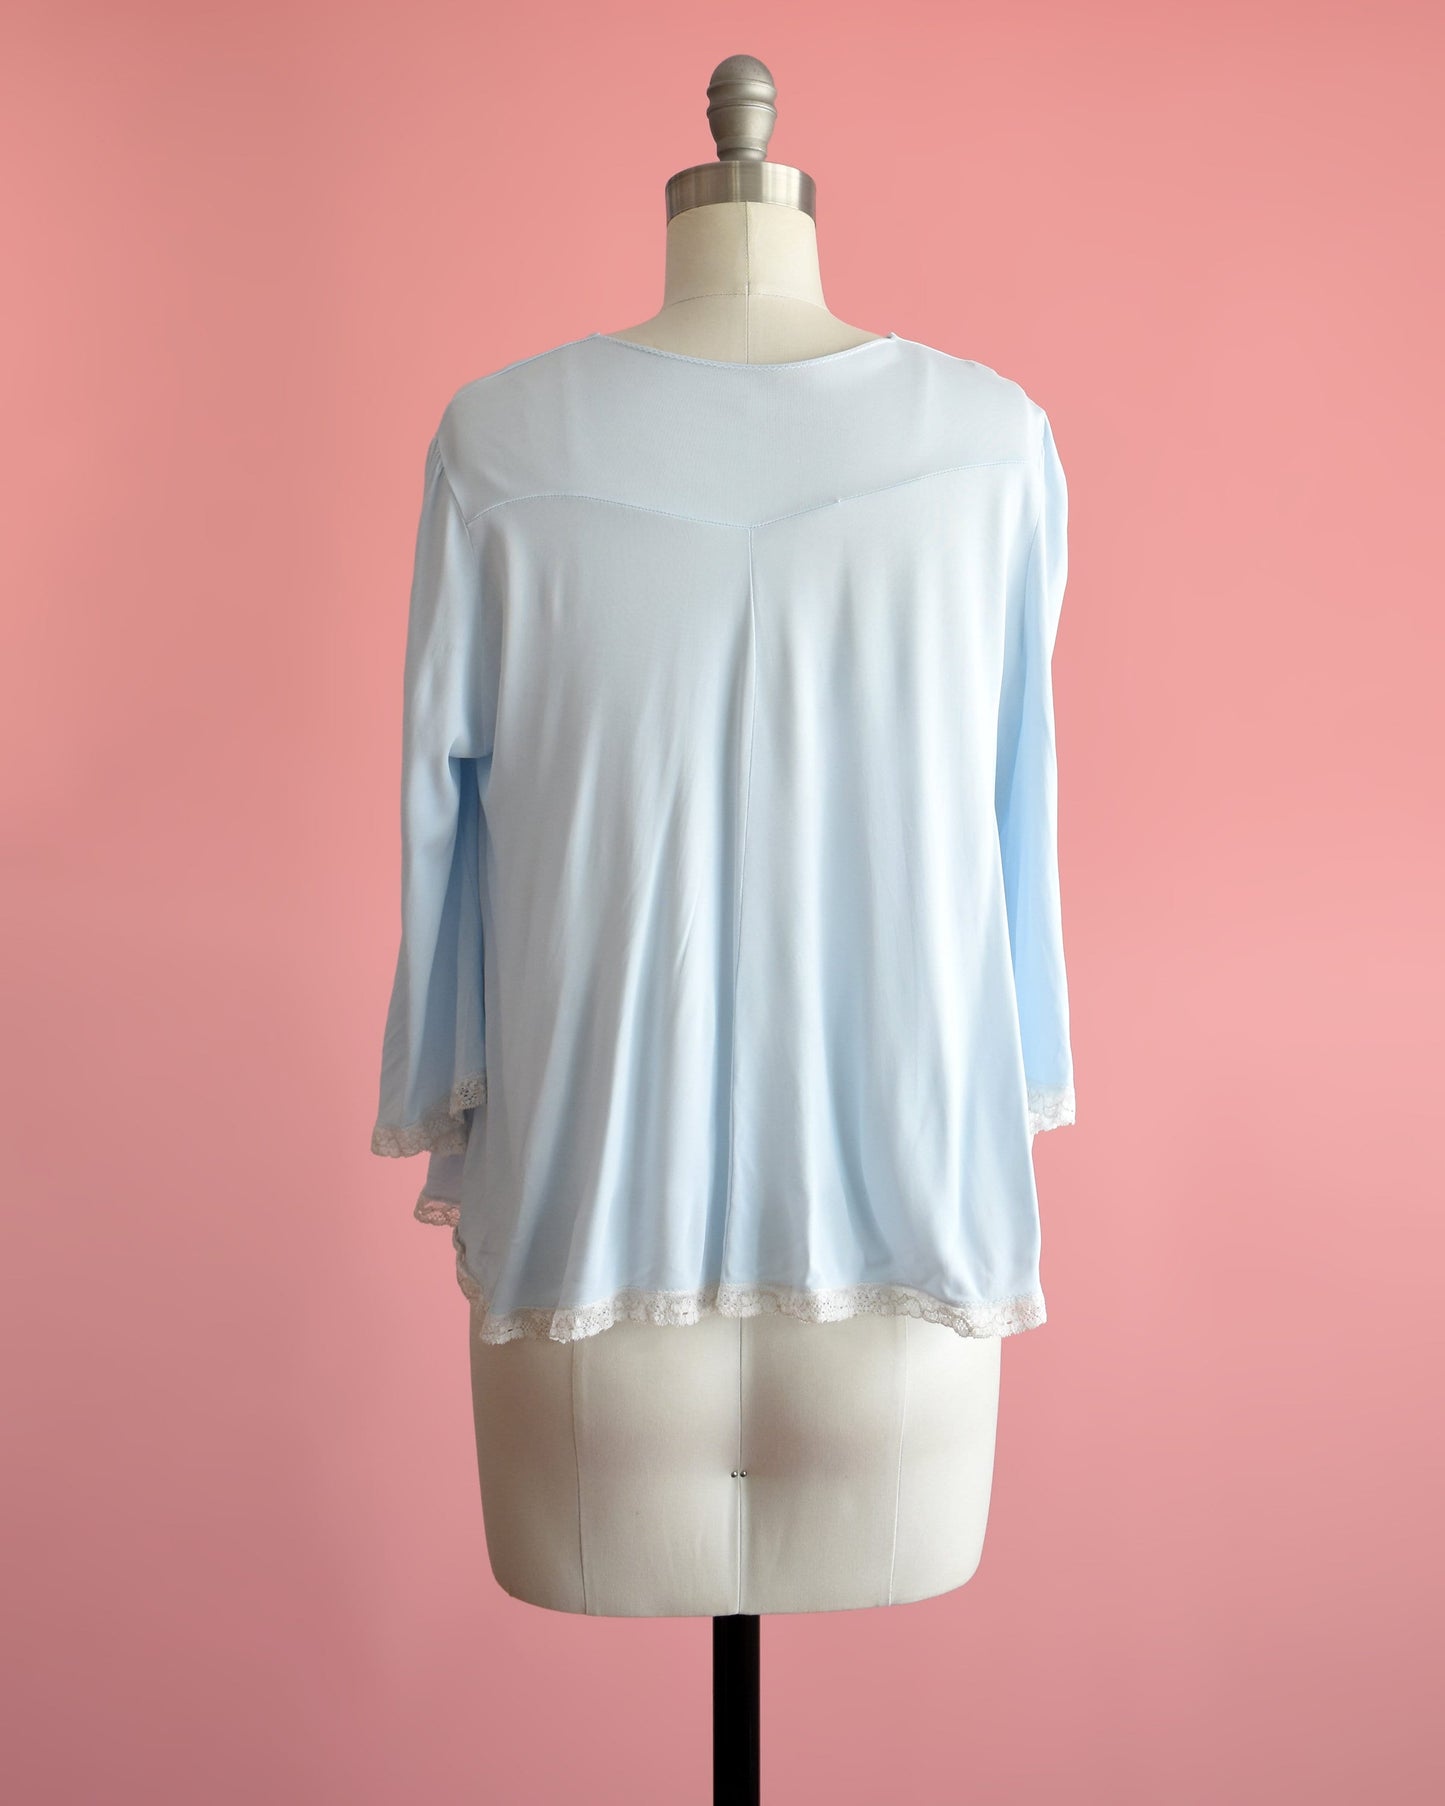 Back view of a vintage 60s light blue bed jacket with cream lace trim around the hem and cuffs. The garment is modeled on a dress form.